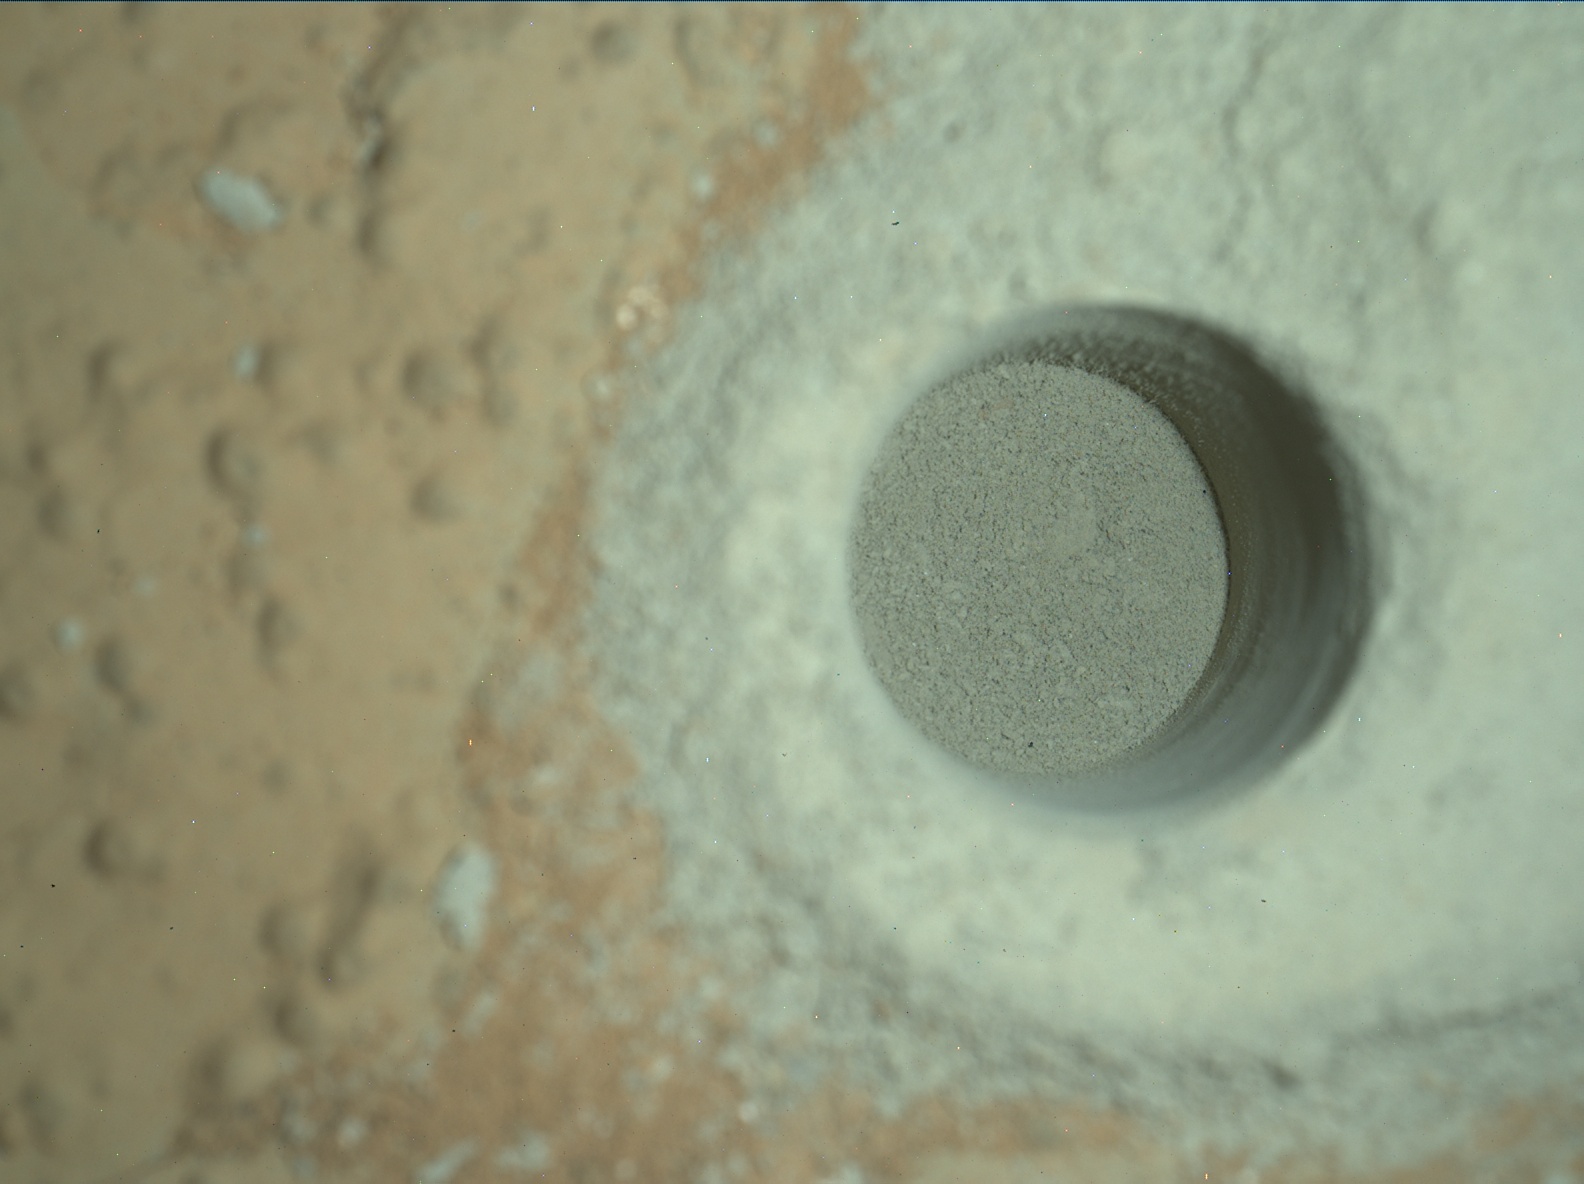 Nasa's Mars rover Curiosity acquired this image using its Mars Hand Lens Imager (MAHLI) on Sol 292